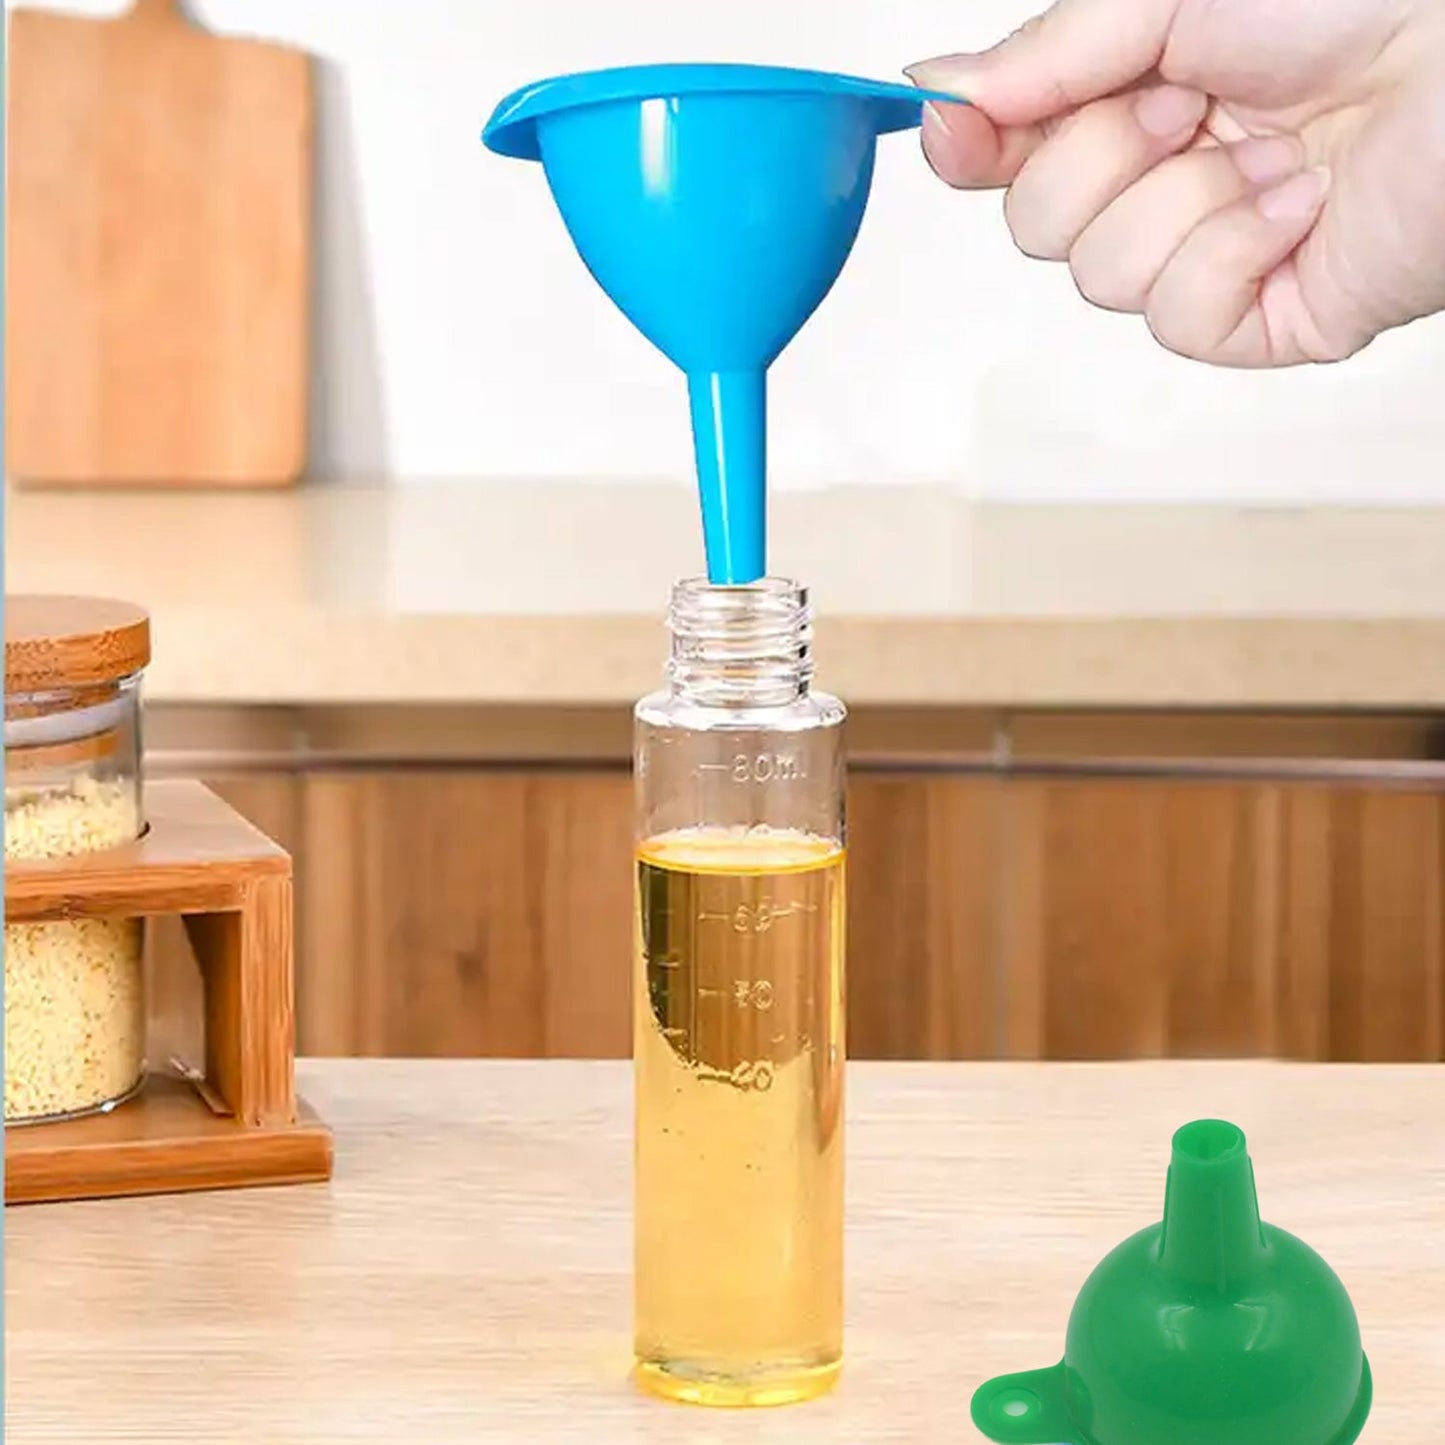 Silicone Funnel For Pouring Oil, Sauce, Water, Juice And Small Food-GrainsFood Grade Silicone Funnel 1 Pc